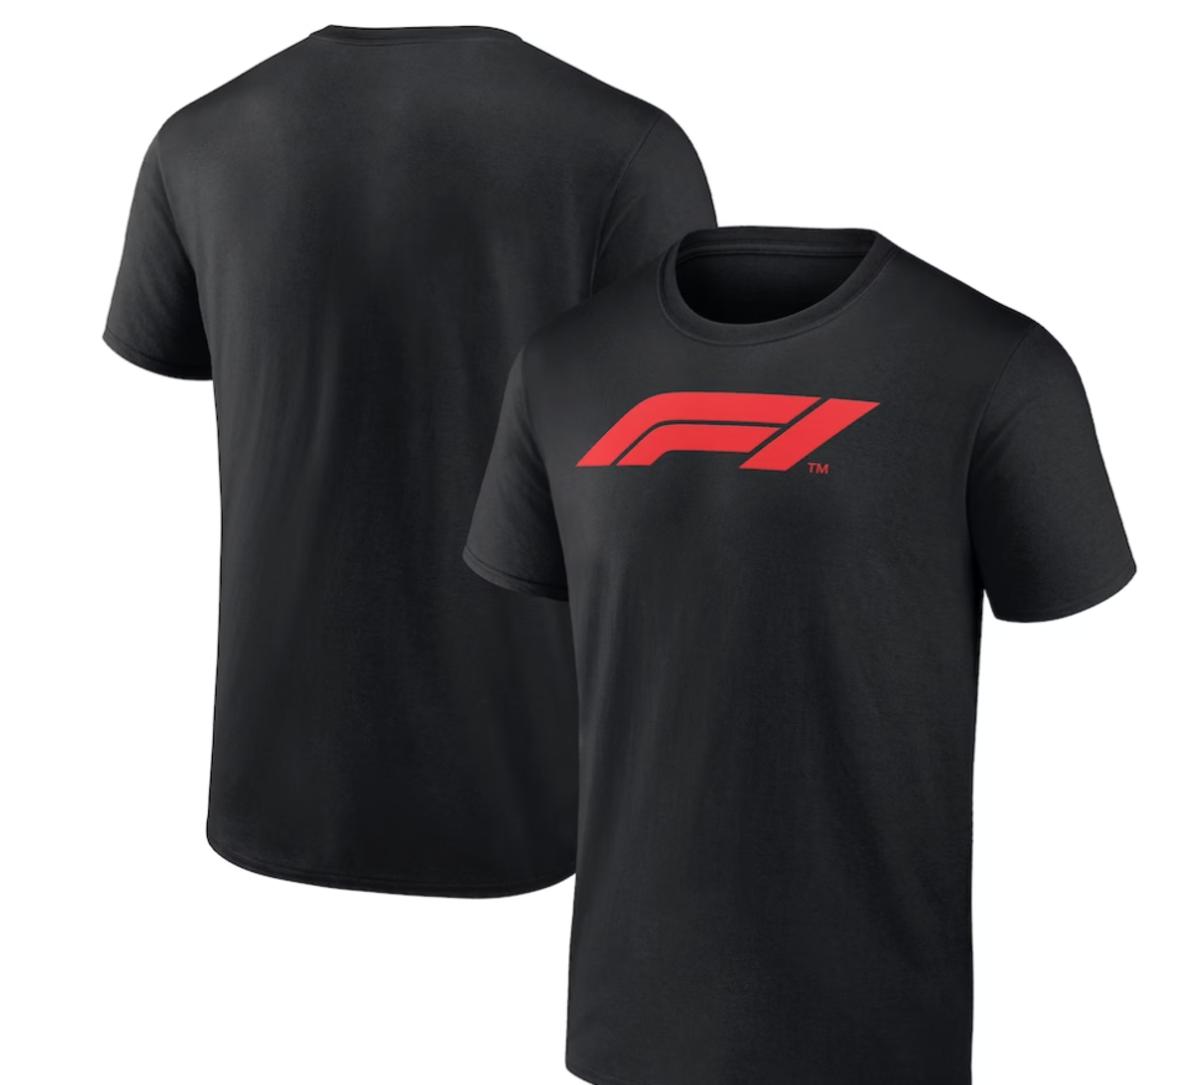 Miami Grand Prix Gear, How to buy Formula 1 Official Gear and Apparel -  Sports Illustrated